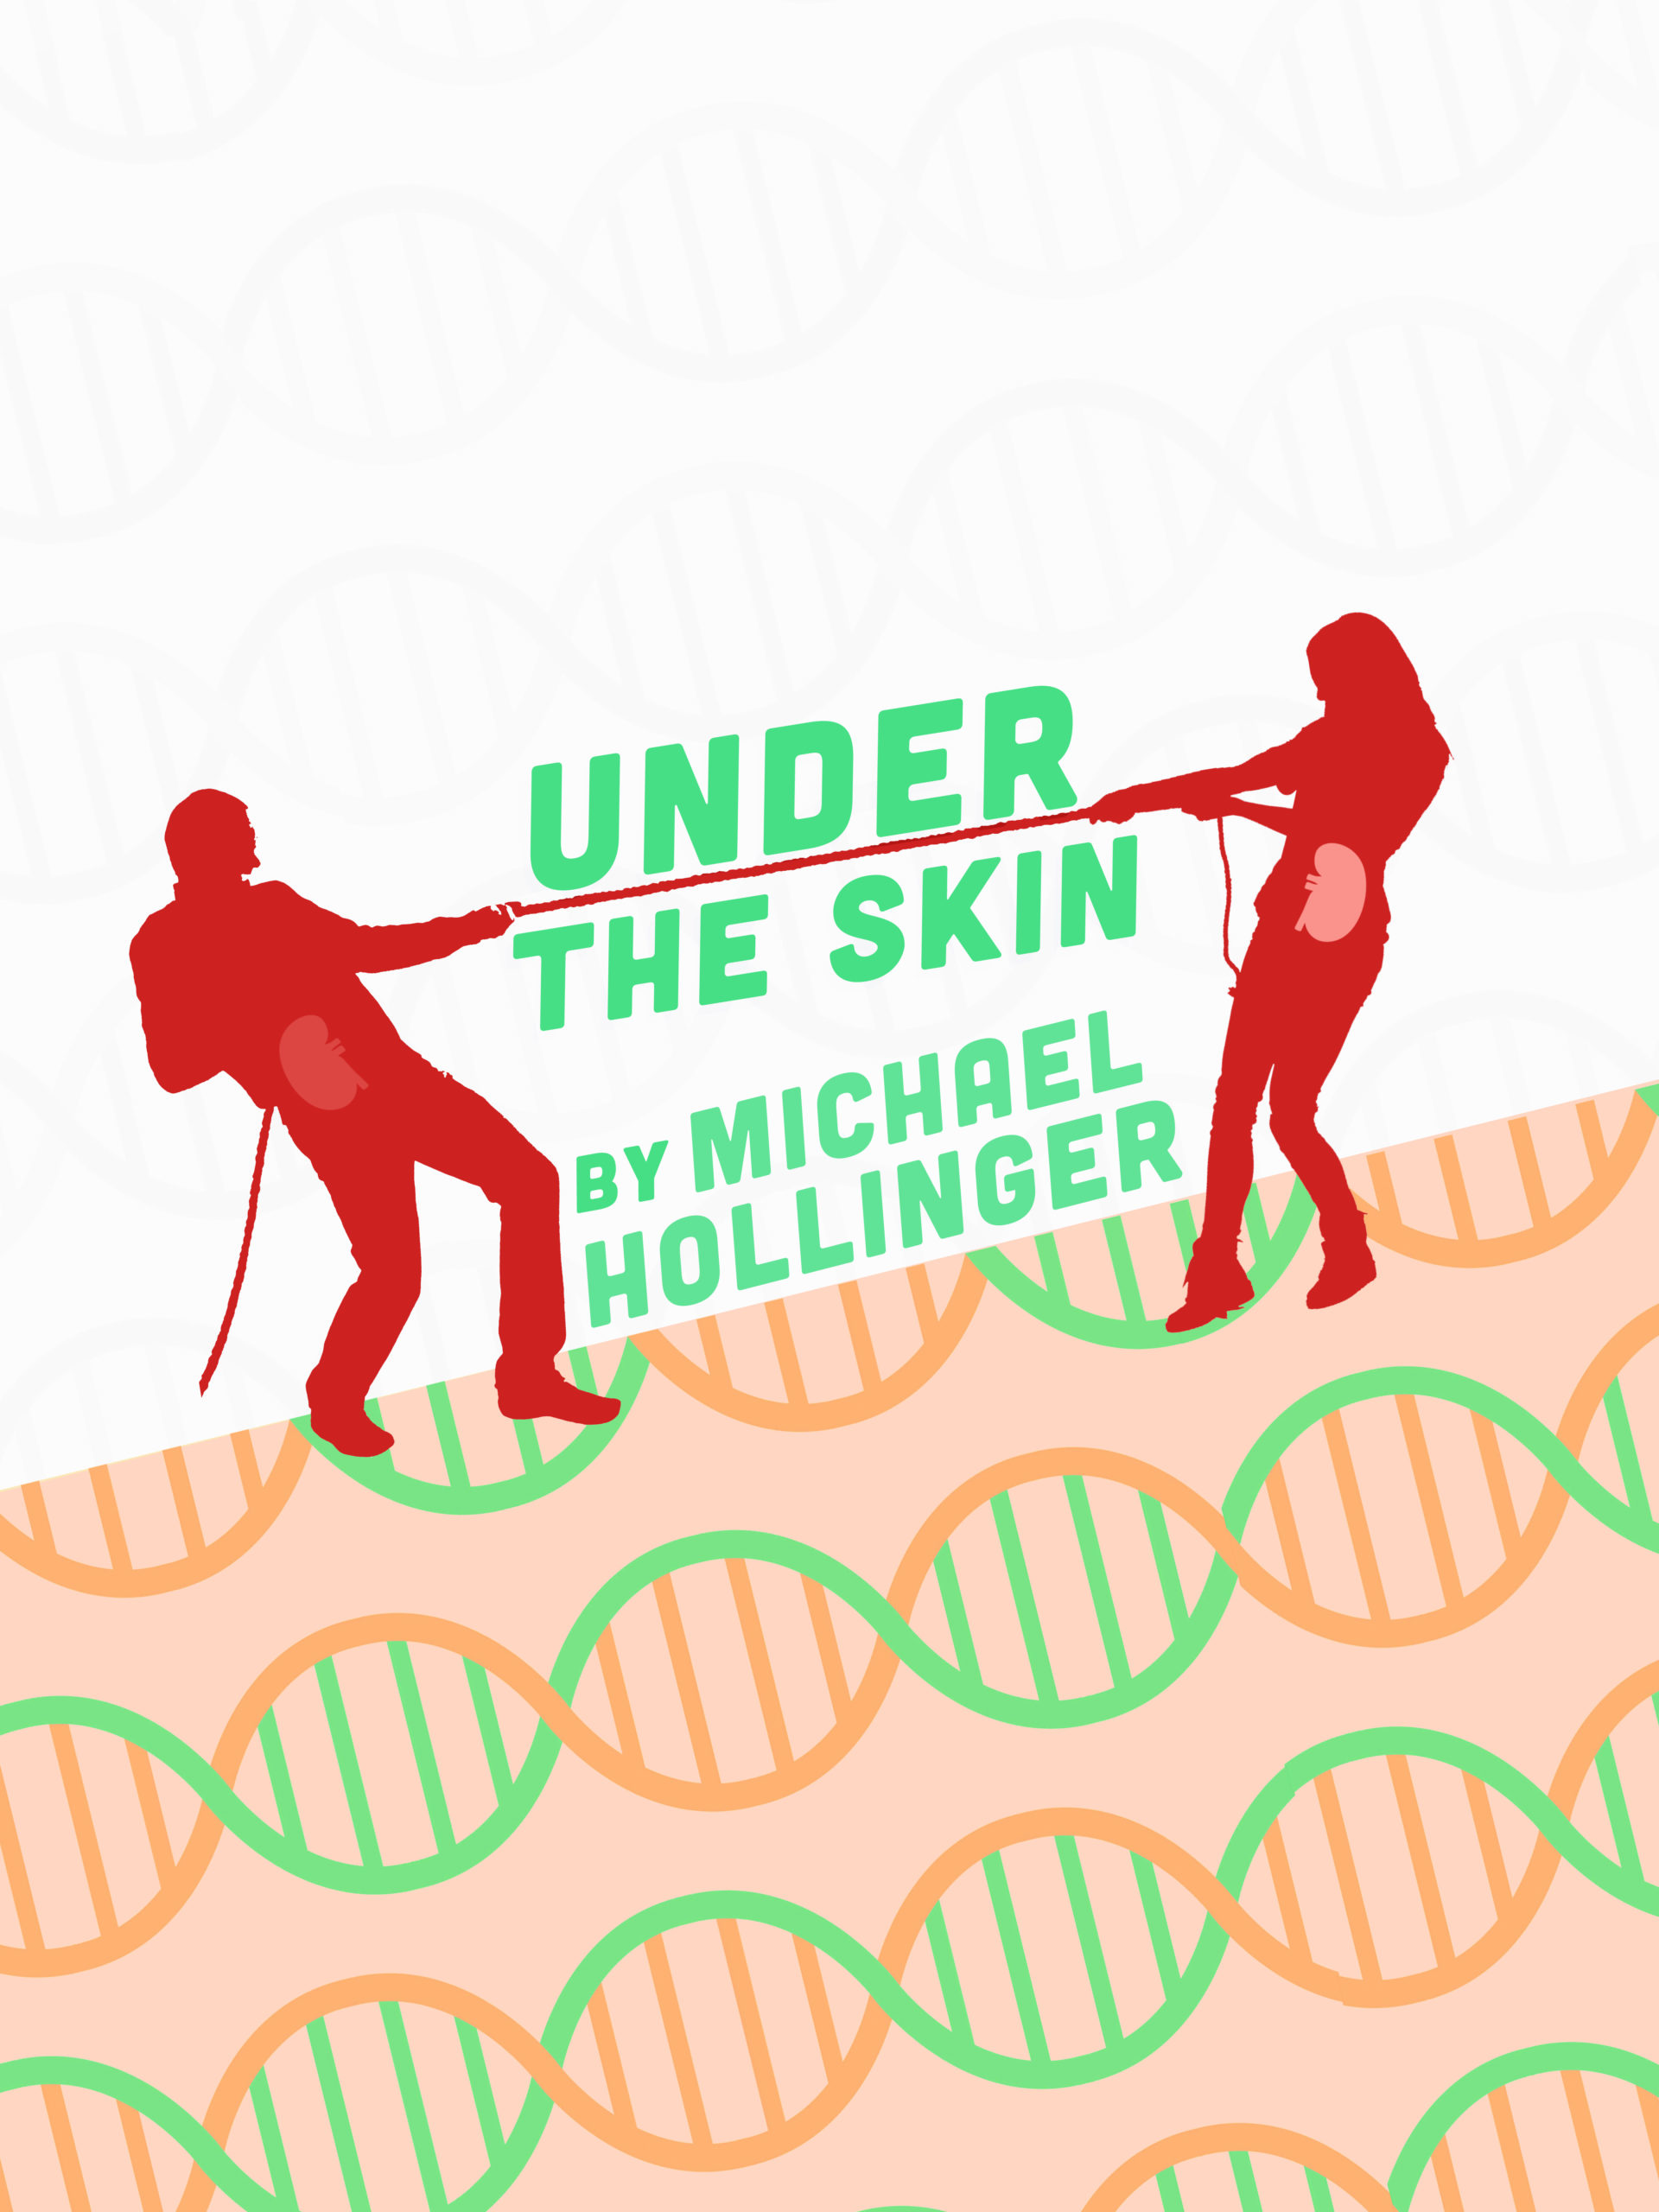 Under the Skin by Michael Hollinger at International City Theatre